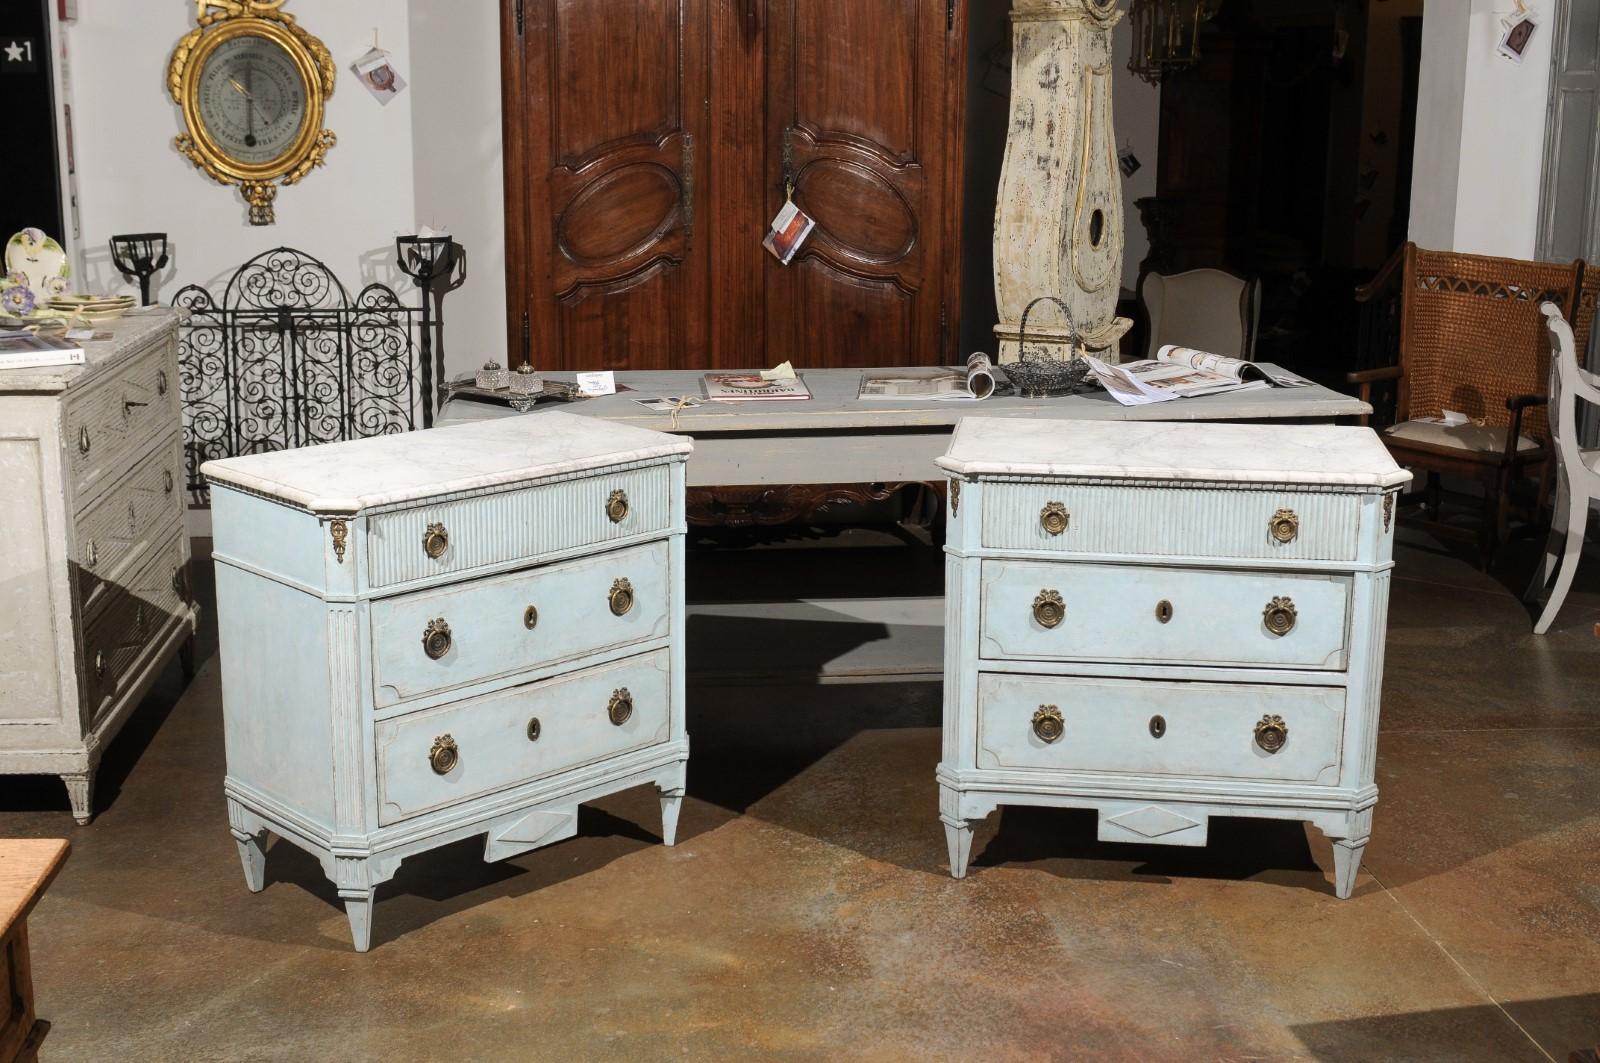 A pair of Swedish Gustavian style light blue painted wood chests from the 19th century, with faux marble tops, reeded accents and canted side posts. Born in Sweden during the 19th century, each of this exquisite pair of chests features a marbleized